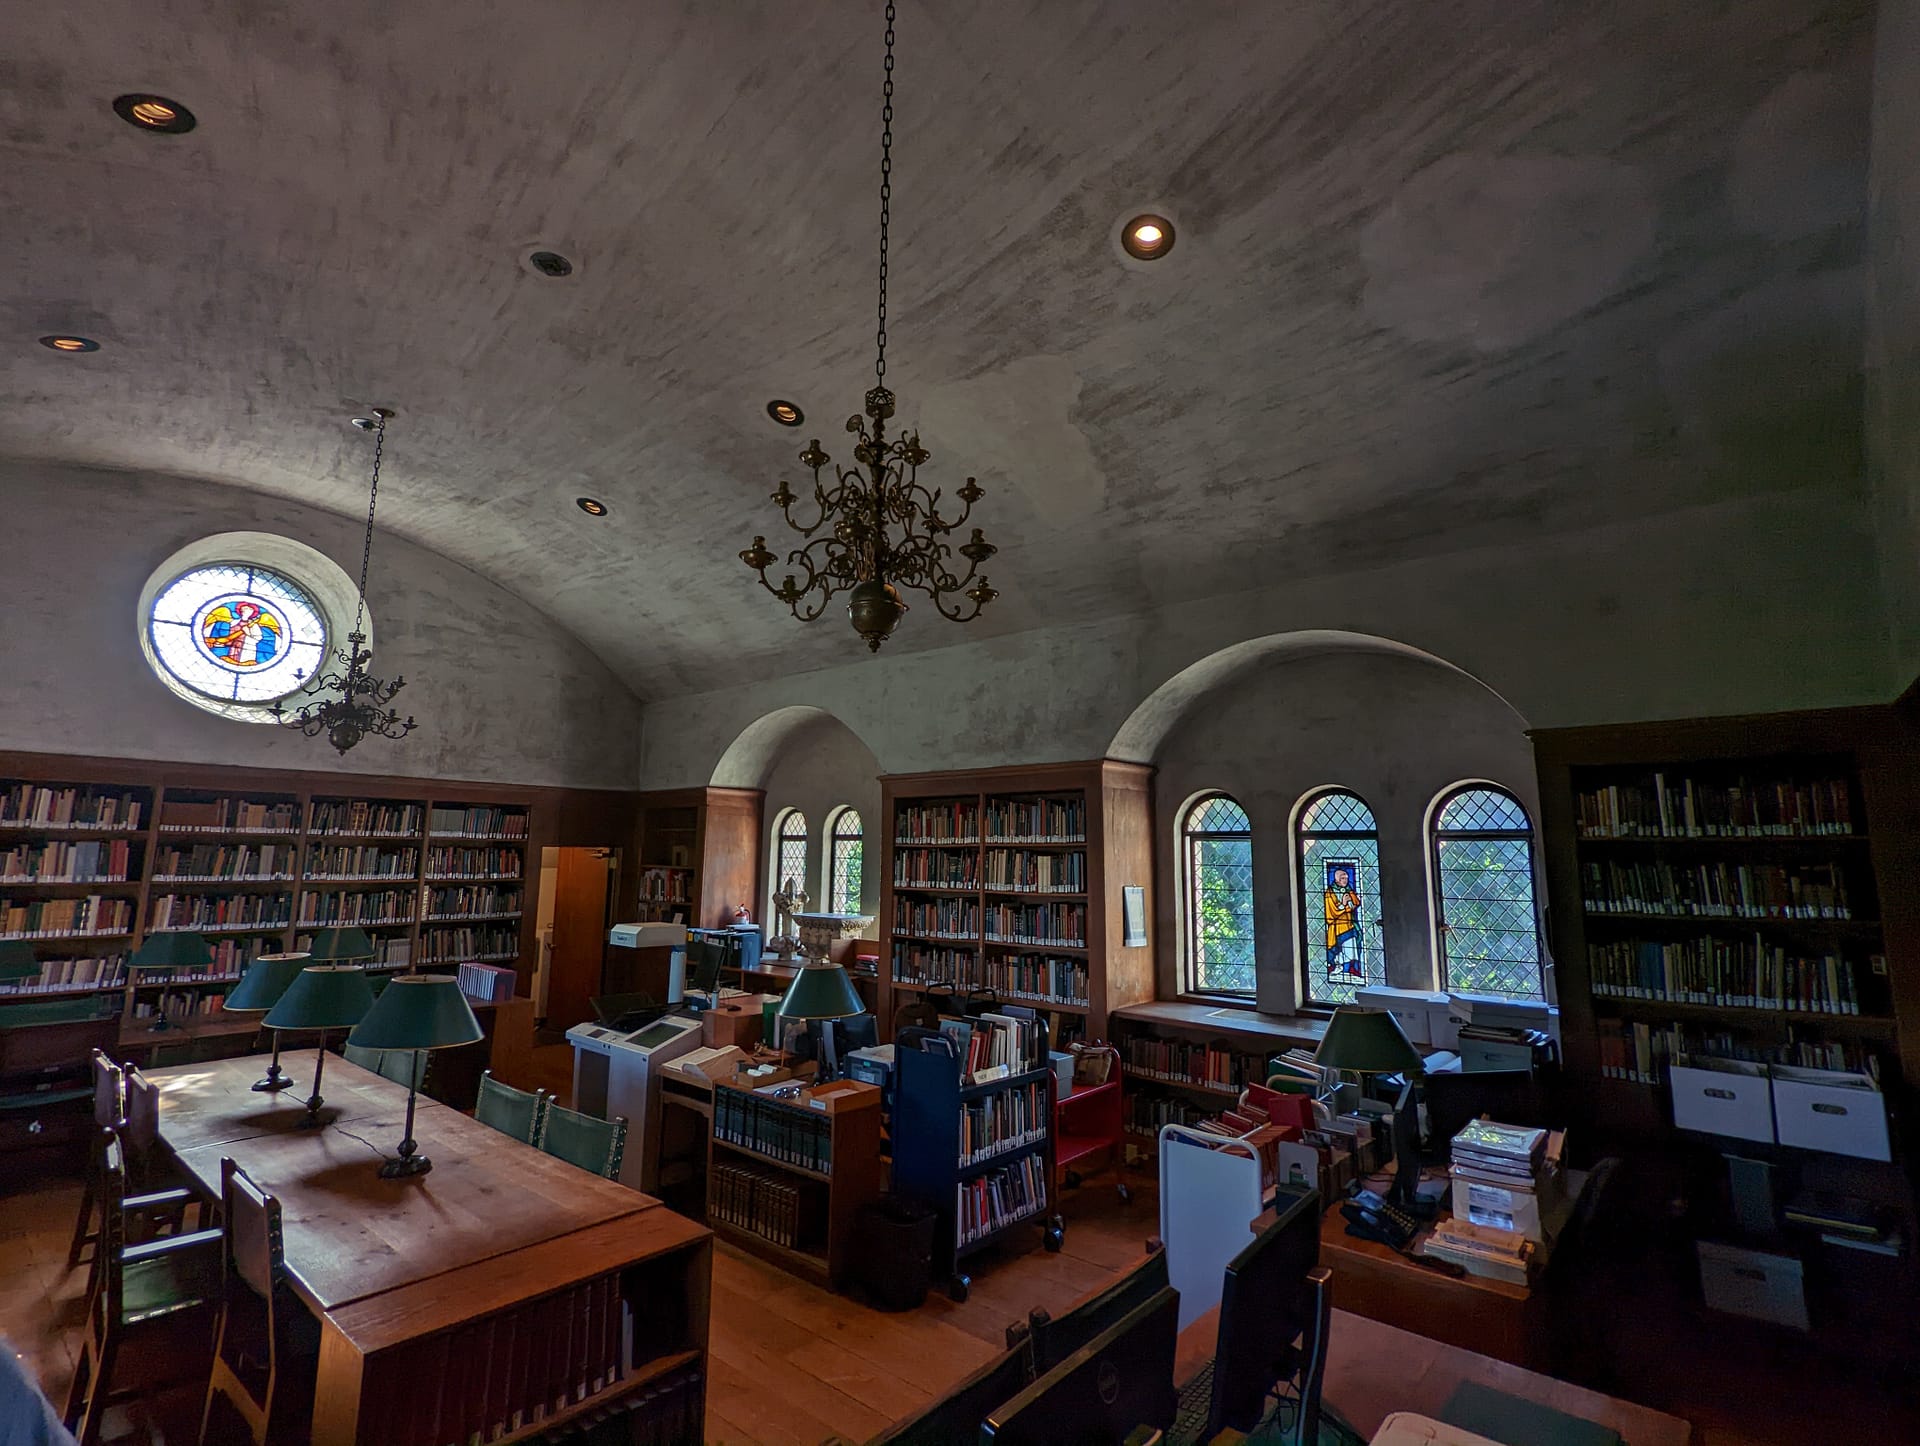 The space has a vaulted ceiling with walls of books and stained glass windows